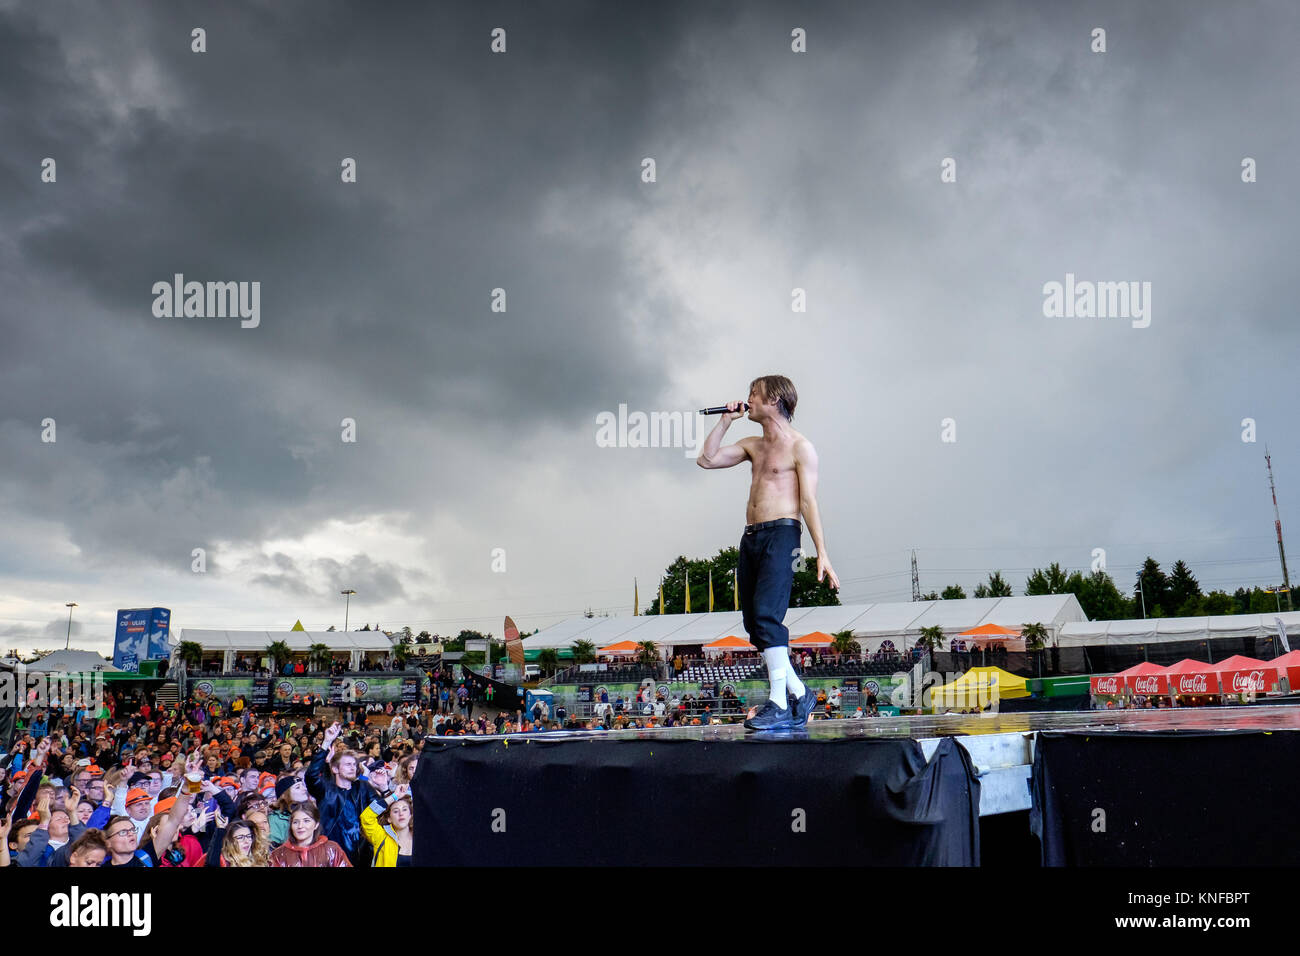 The Swedish rock band Mando Diao performs a live concert at the Swiss music festival Rock the Ring 2016 in Hinwil. Here vocalist Björn Dixgård is seen live on stage. Switzerland, 19/06 2016. Stock Photo